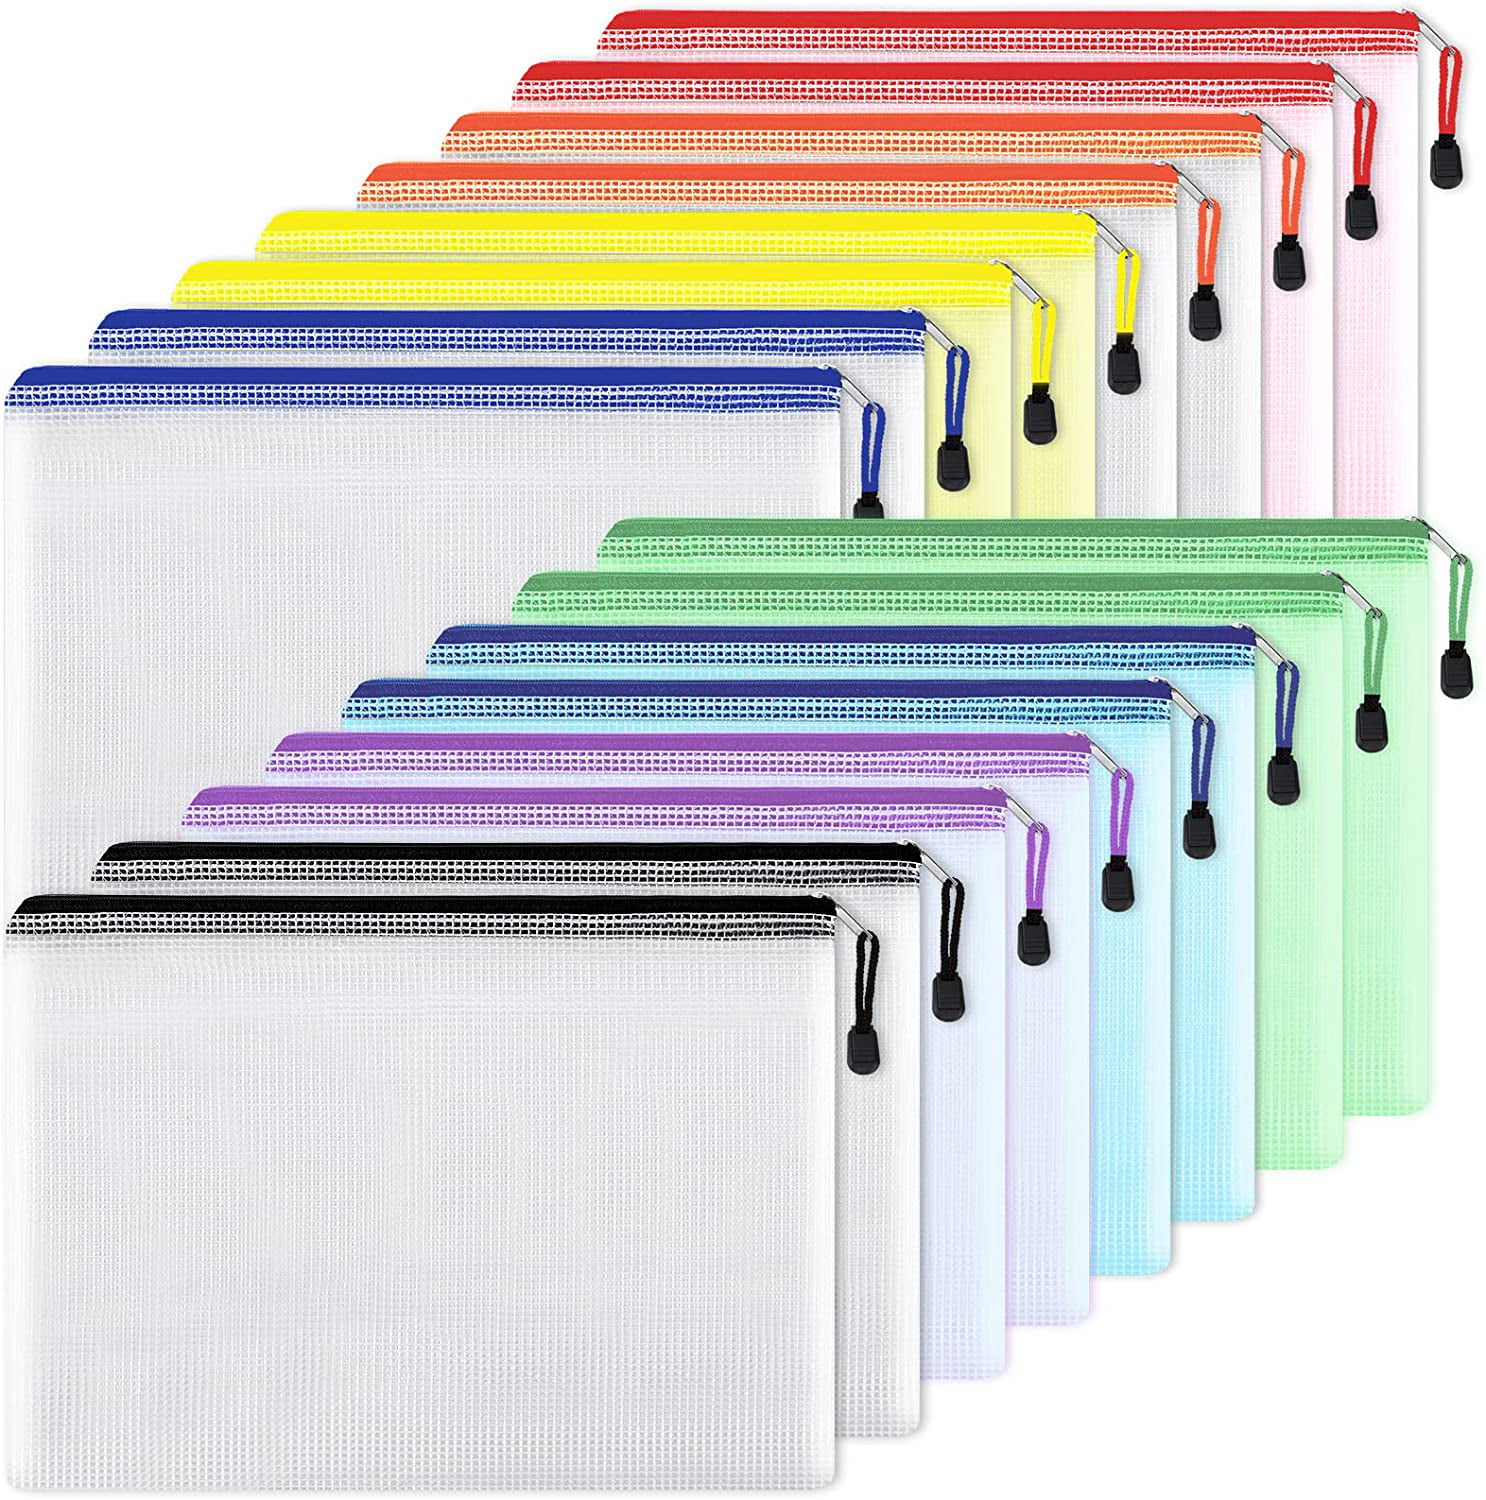 Letter Size Document Holders Multi-Color, 10 Pack Waterproof Zipper File Bags